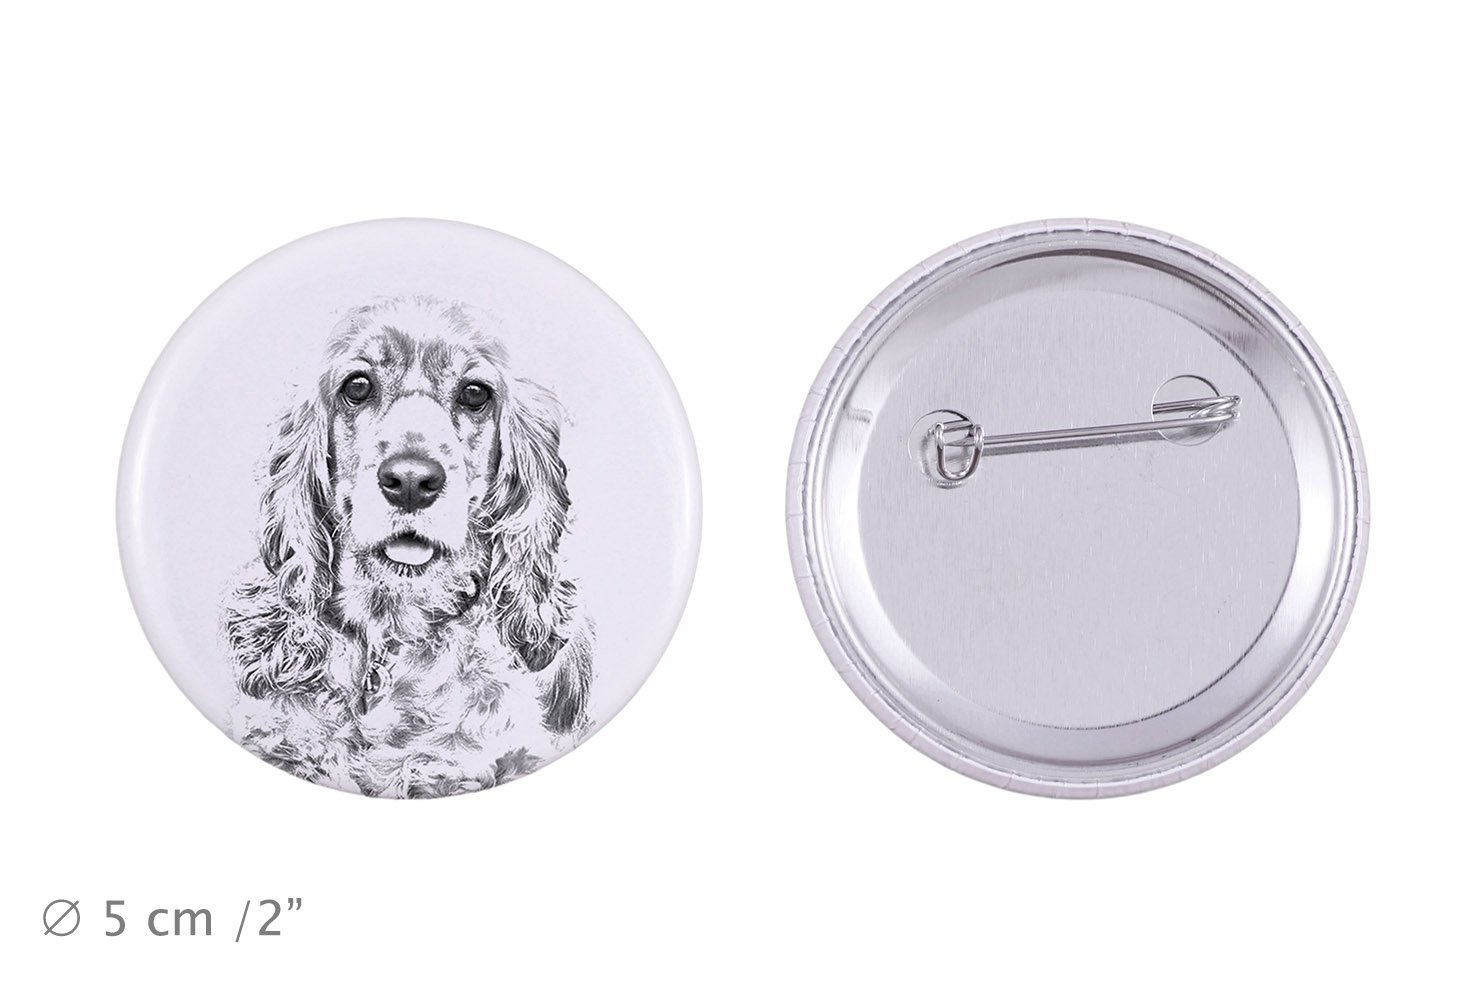 Primary image for Buttons with a dog - American Cocker Spaniel